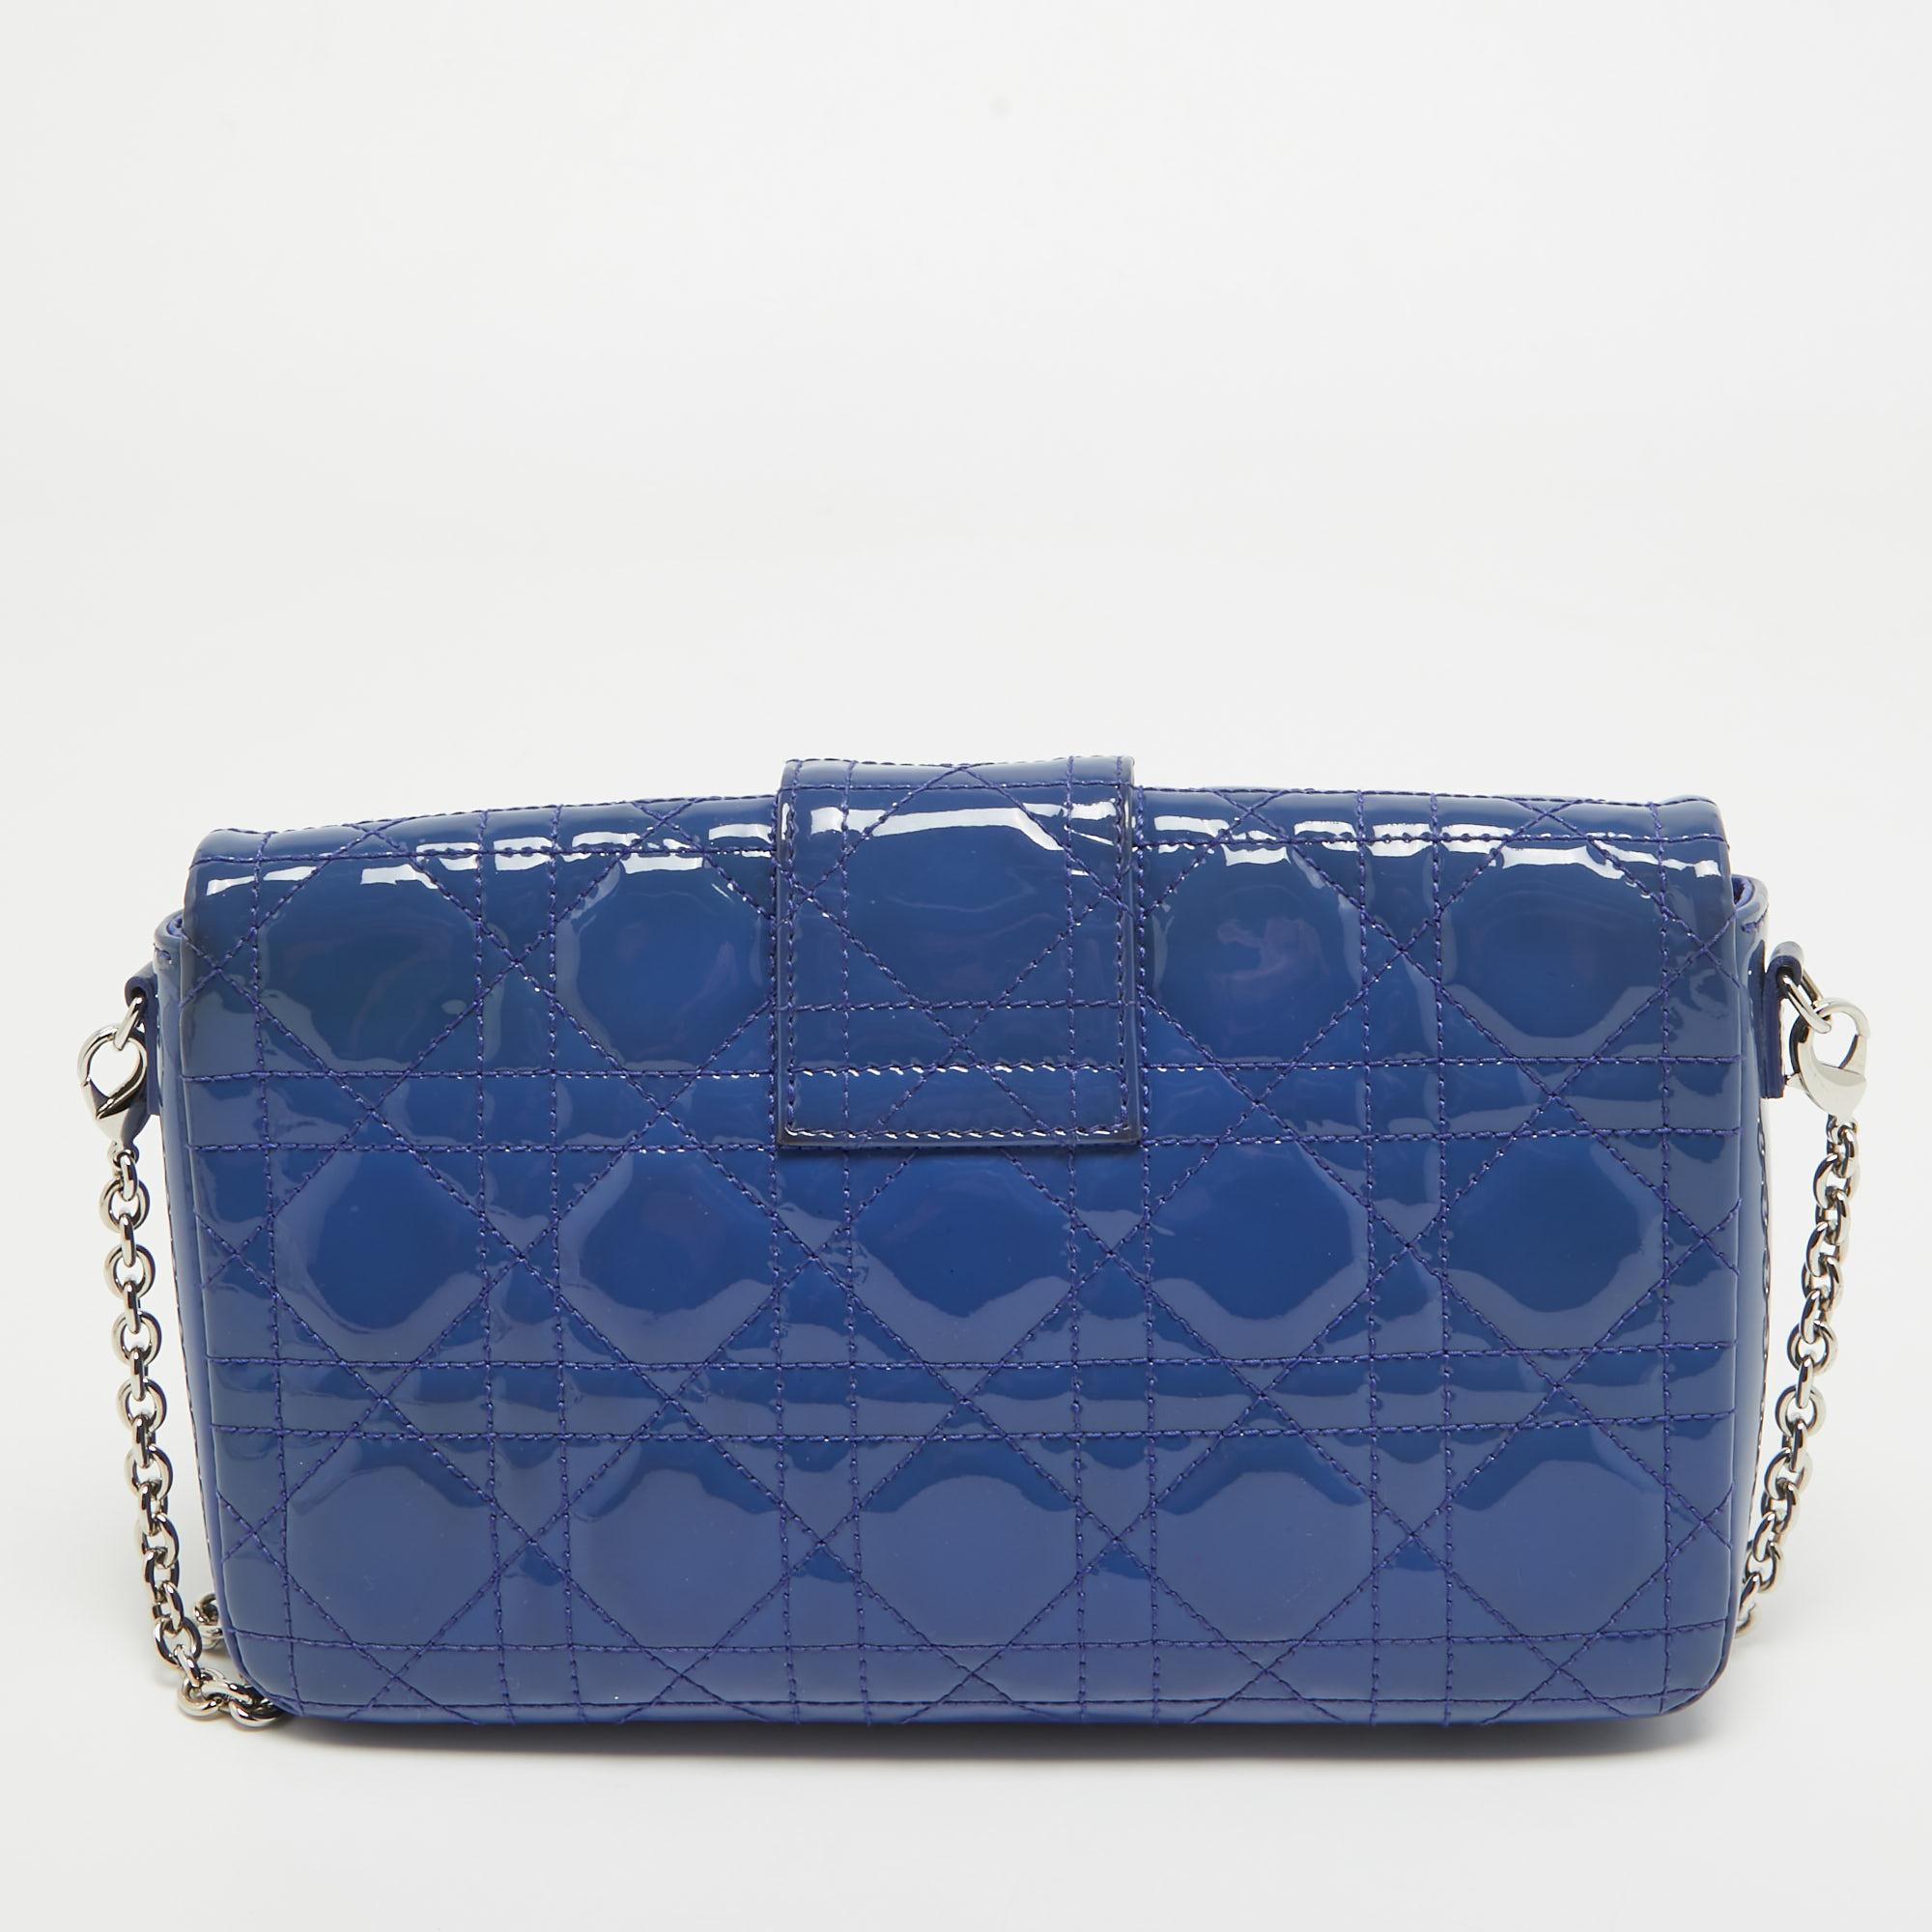 This Dior blue clutch for women has the kind of design that ensures high appeal, whether held in your hand or on your shoulder. It is a meticulously crafted piece bound to last a long time.

Includes: Receipt, Original Dustbag

